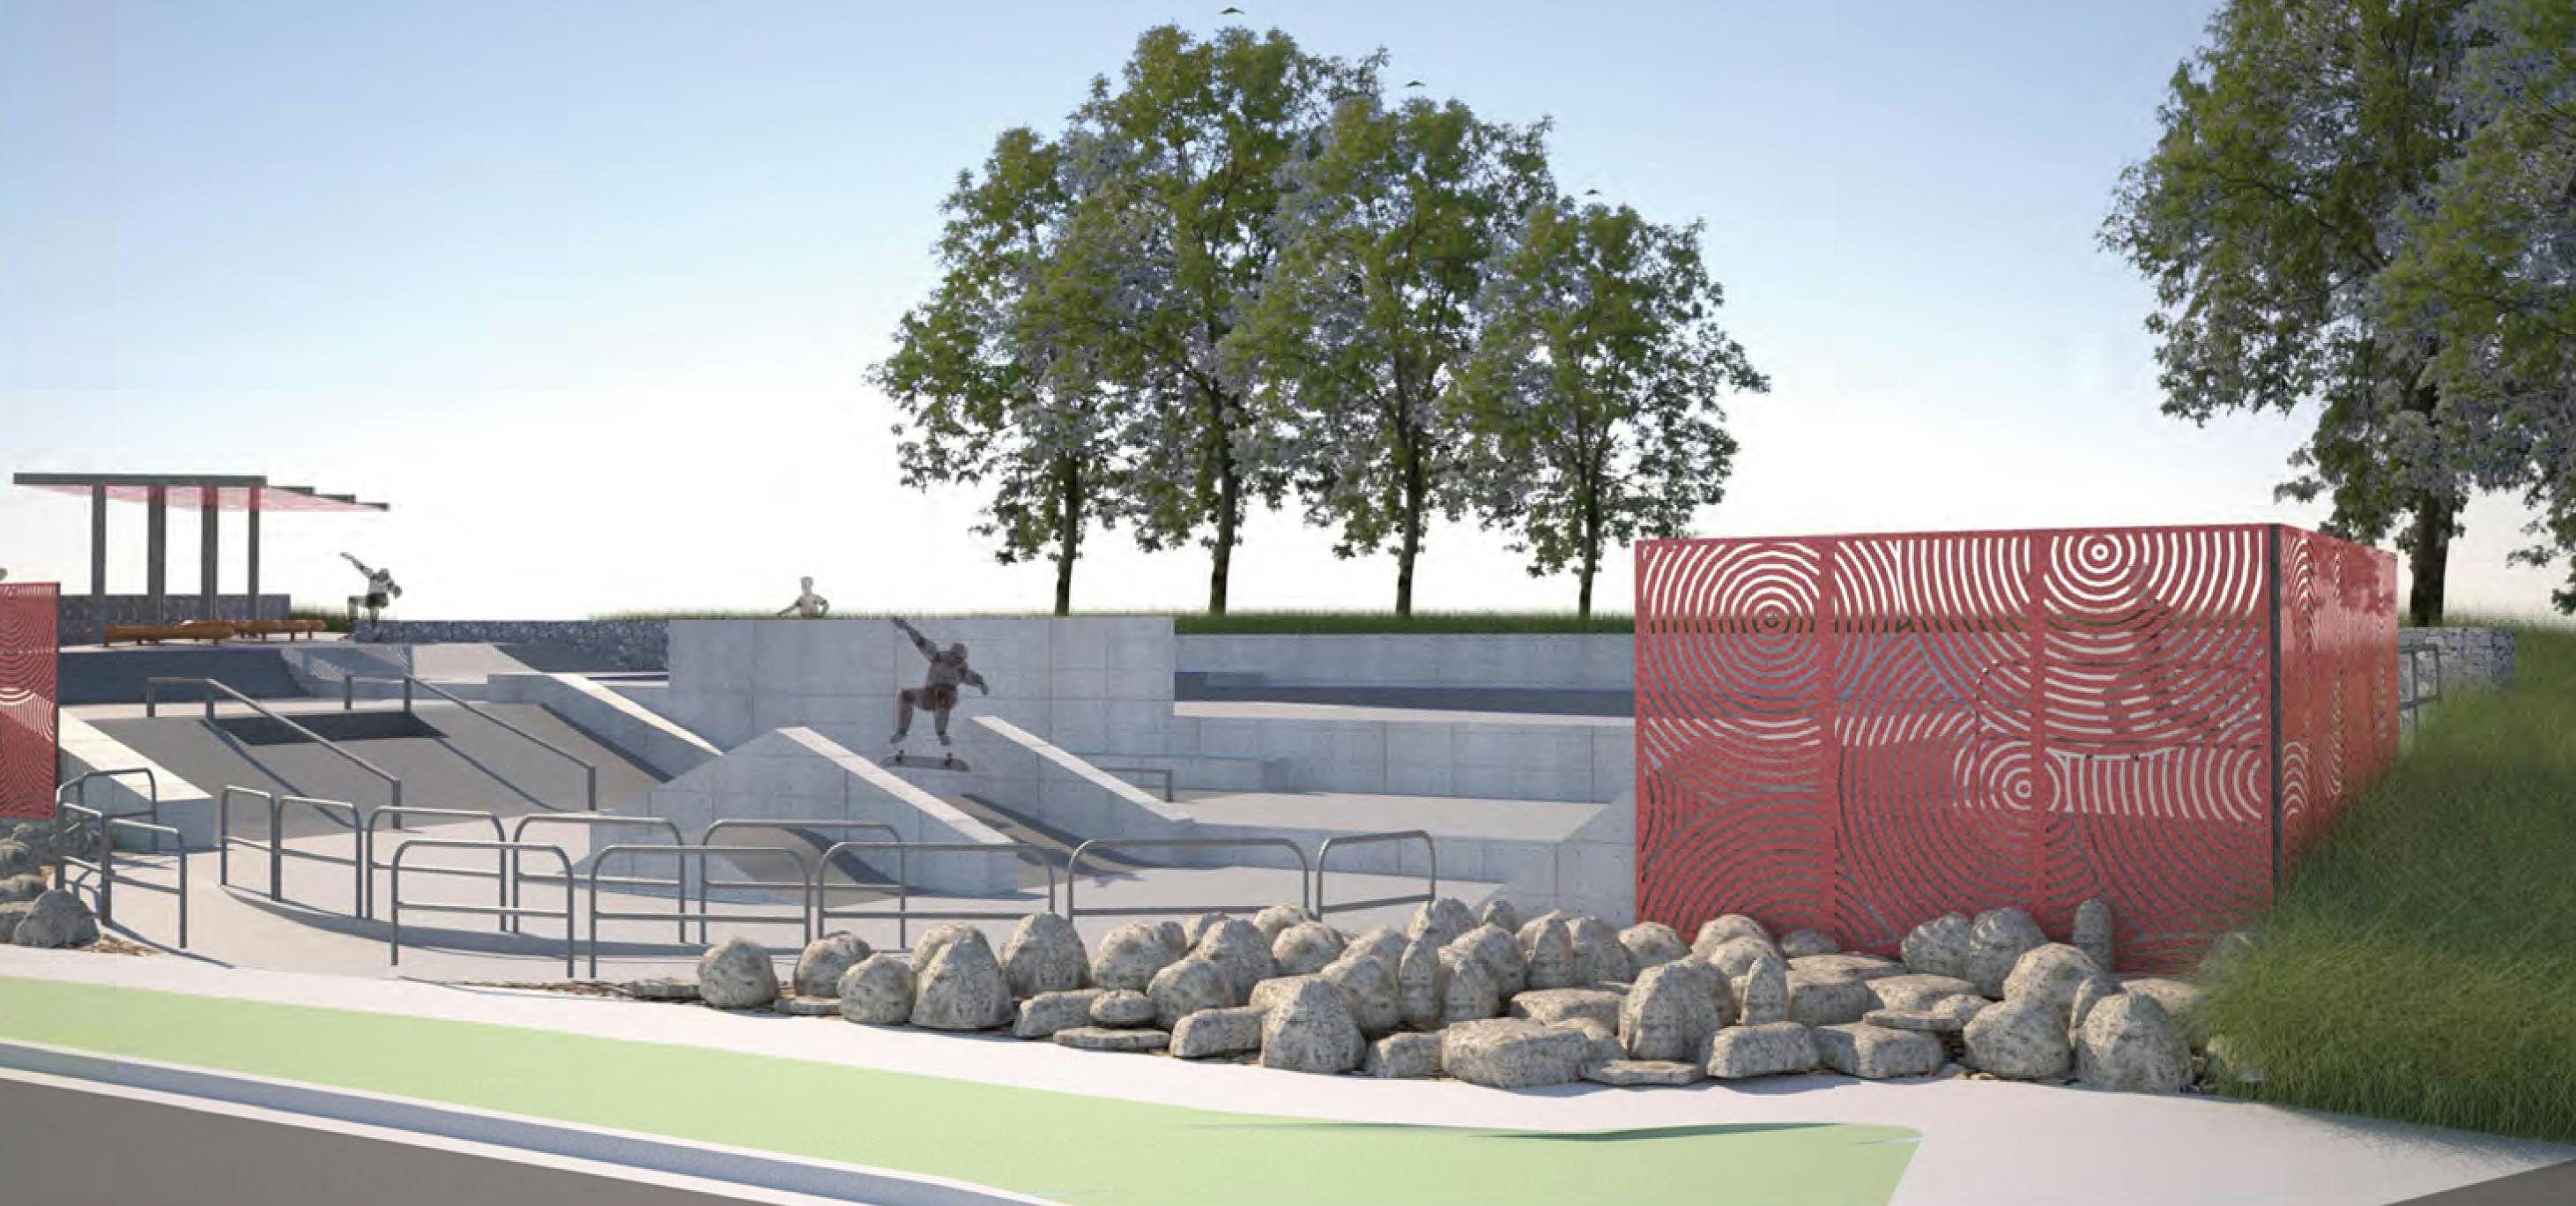 Proposed skate park, perspective 1